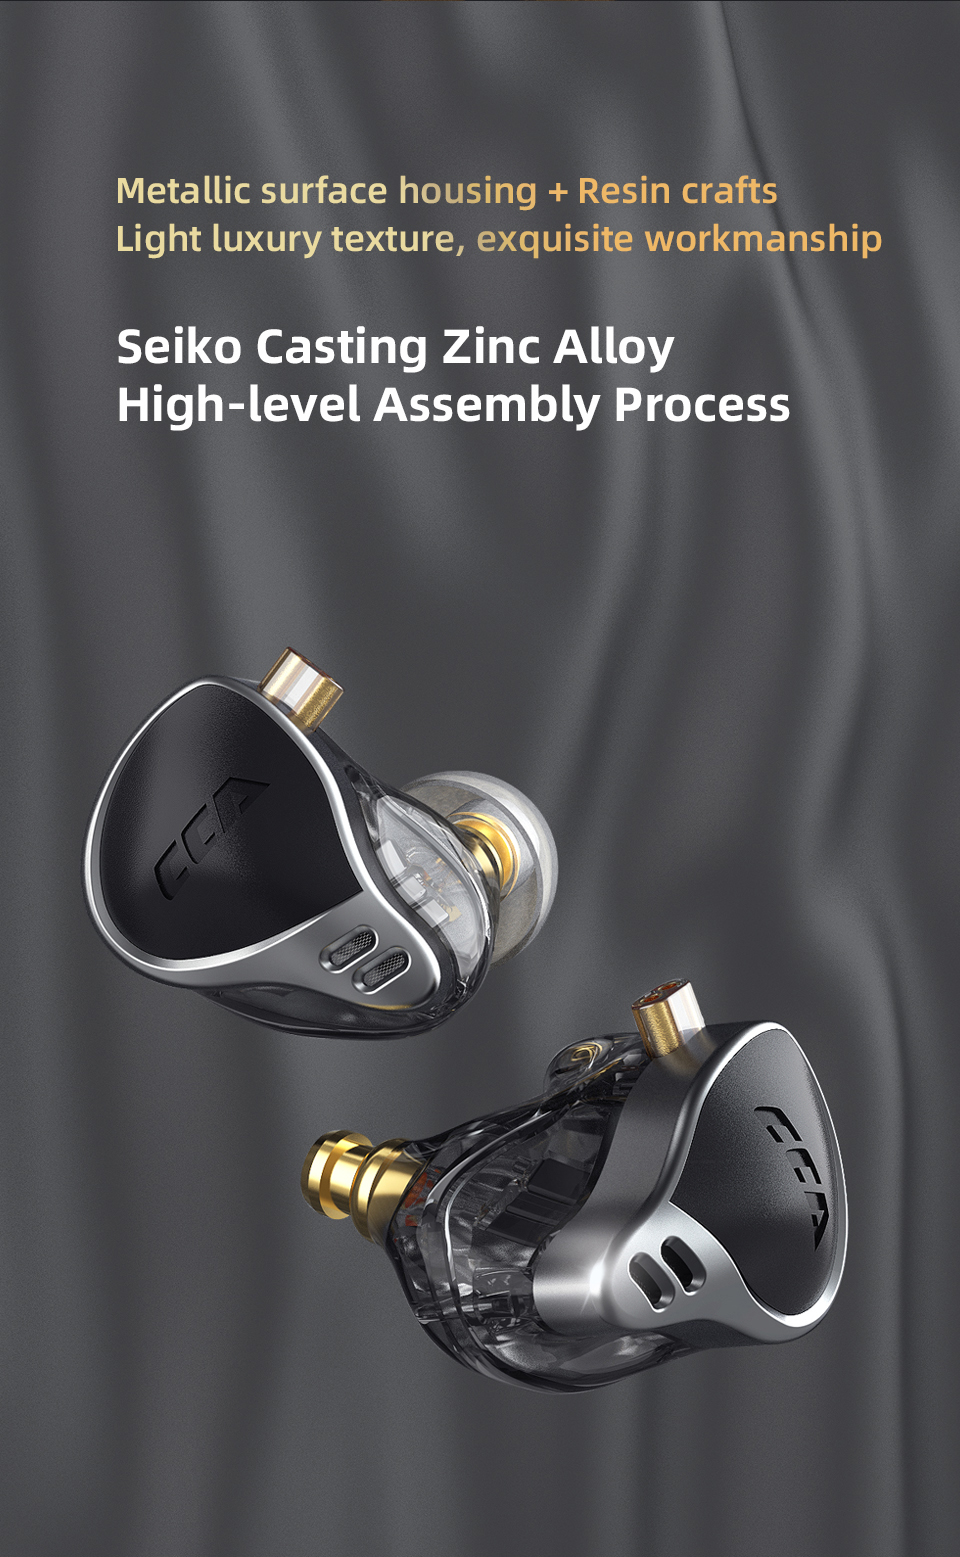 24BA-UnitsCCA-CA24-Balanced-Armature-HiFi-Noise-Cancelling-In-ear-Headset-Detachable-35mm-Wired-Gami-1902071-7